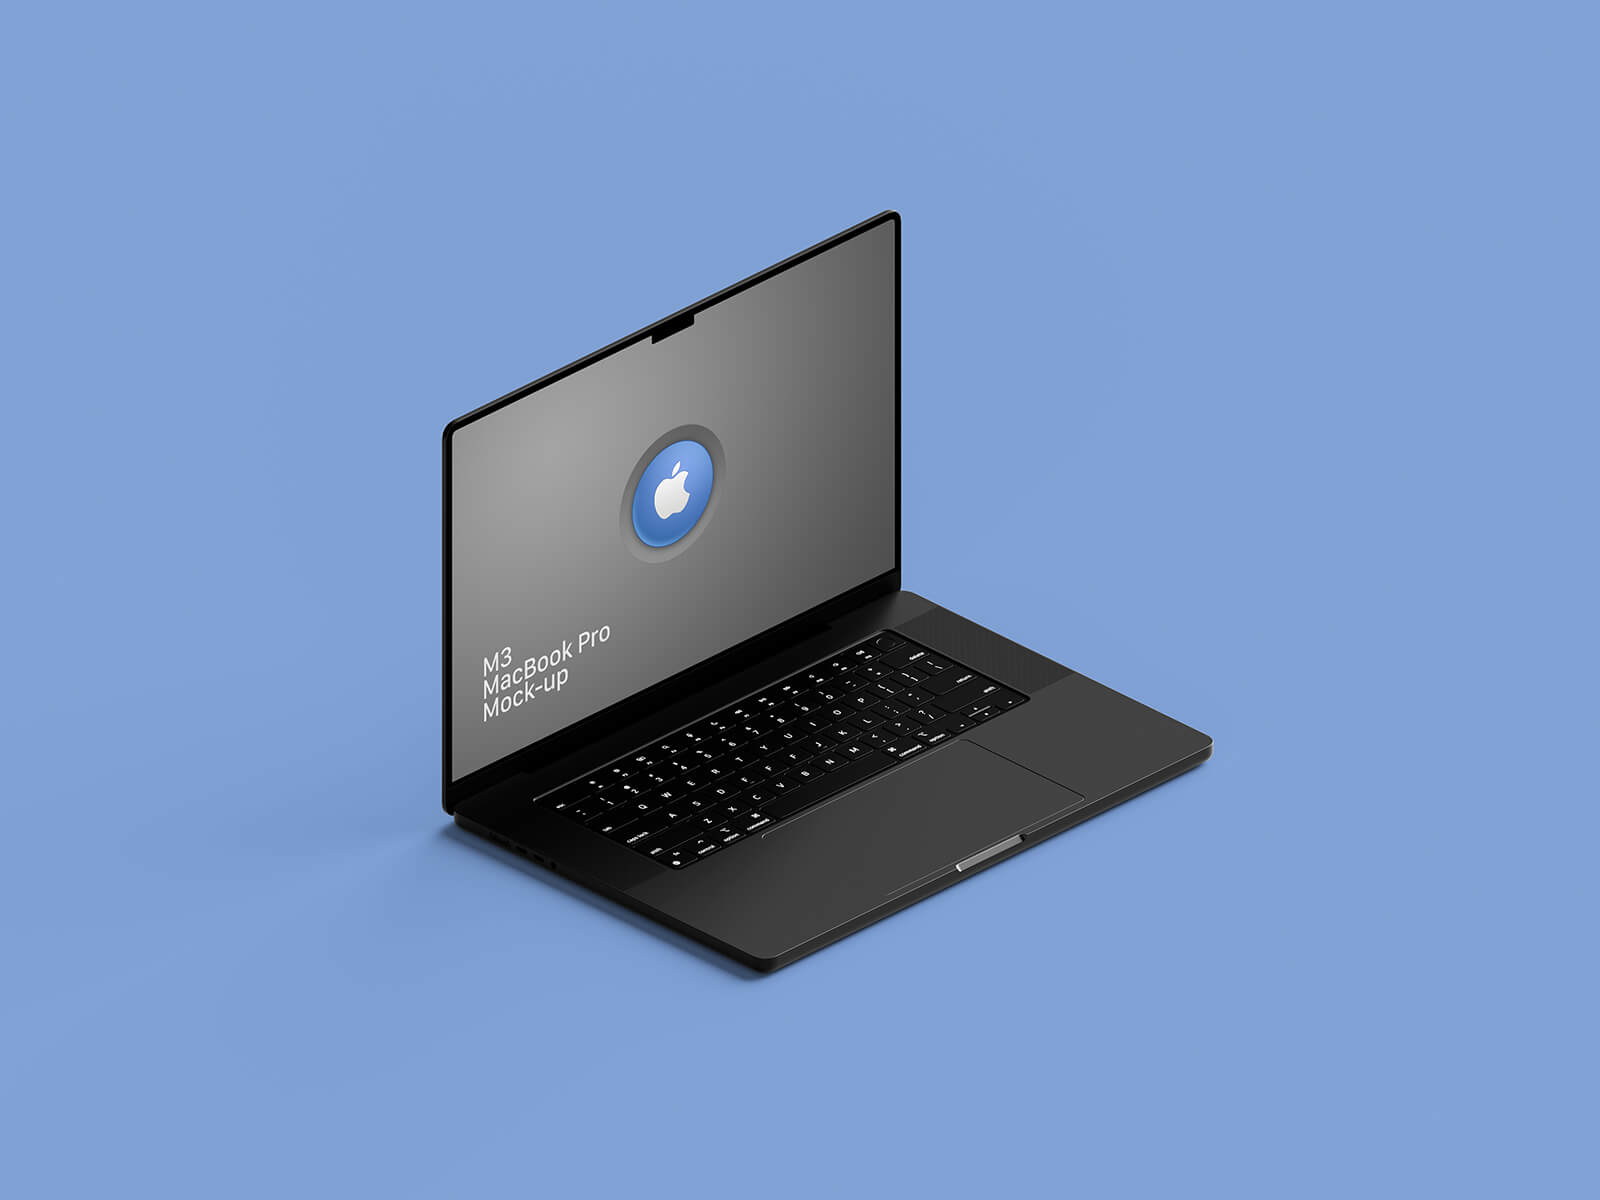 Free Perspective View M3 MacBook Pro Mockup PSD